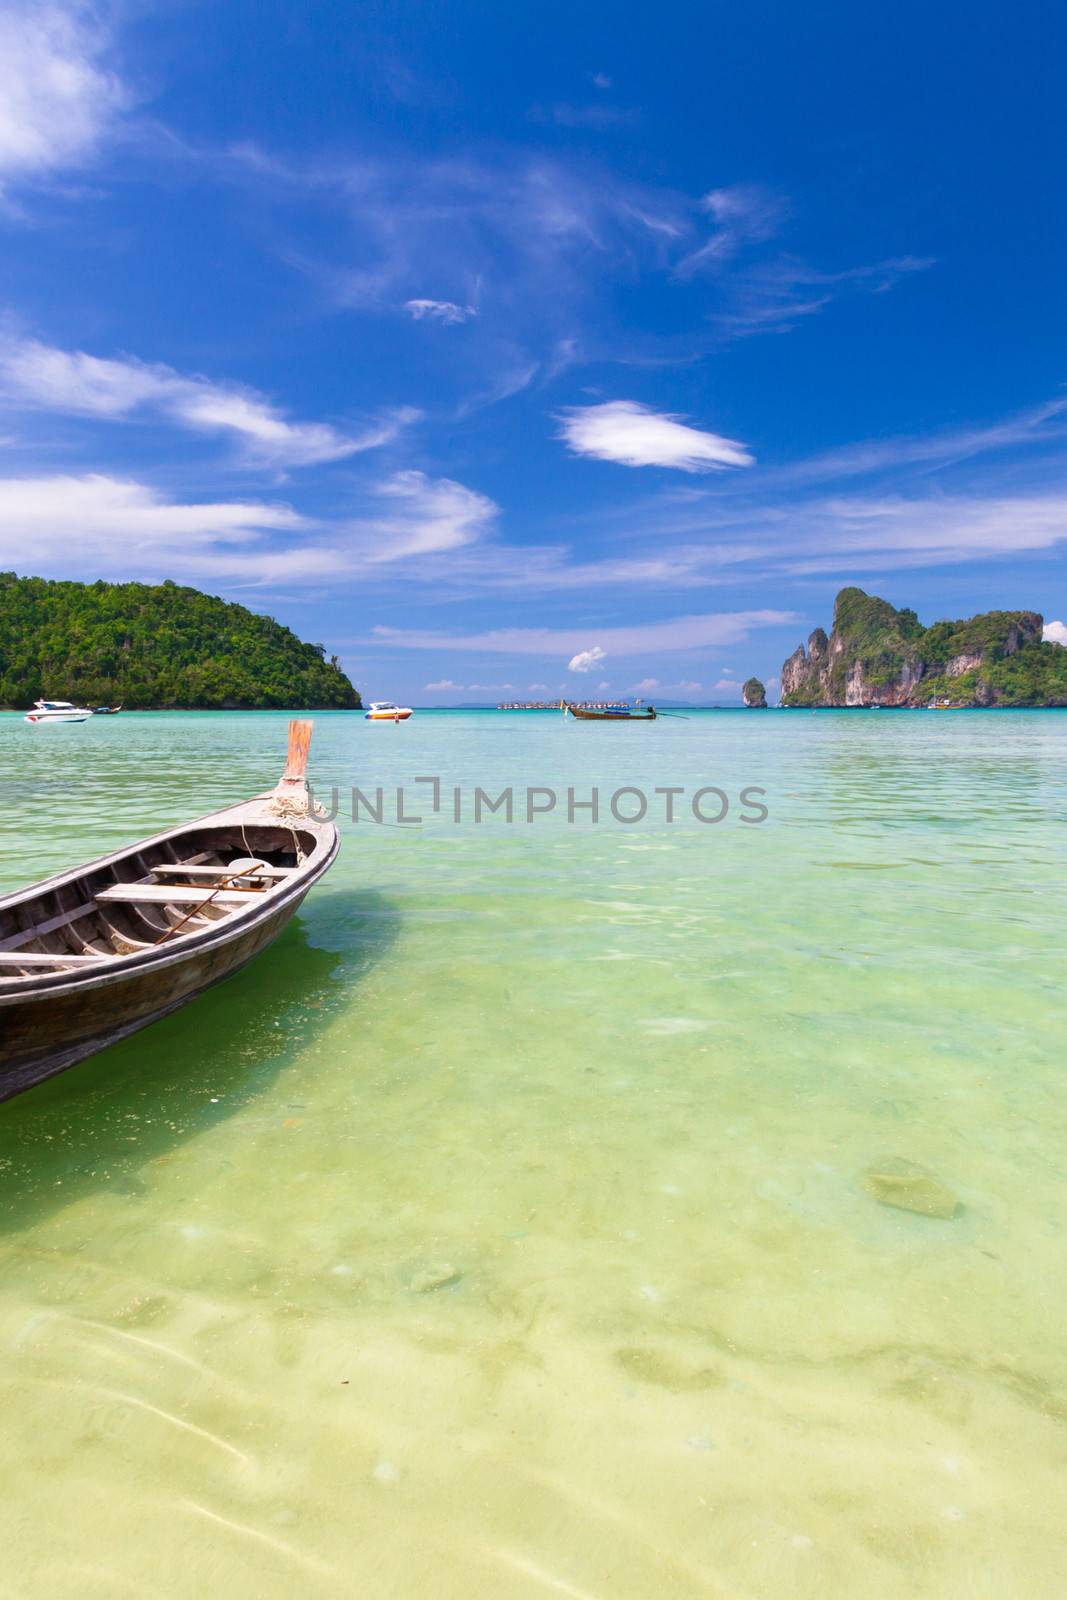 Traditional wooden  boats on a picture perfect tropical beach on Koh Phi Phi Island, Thailand, Asia.